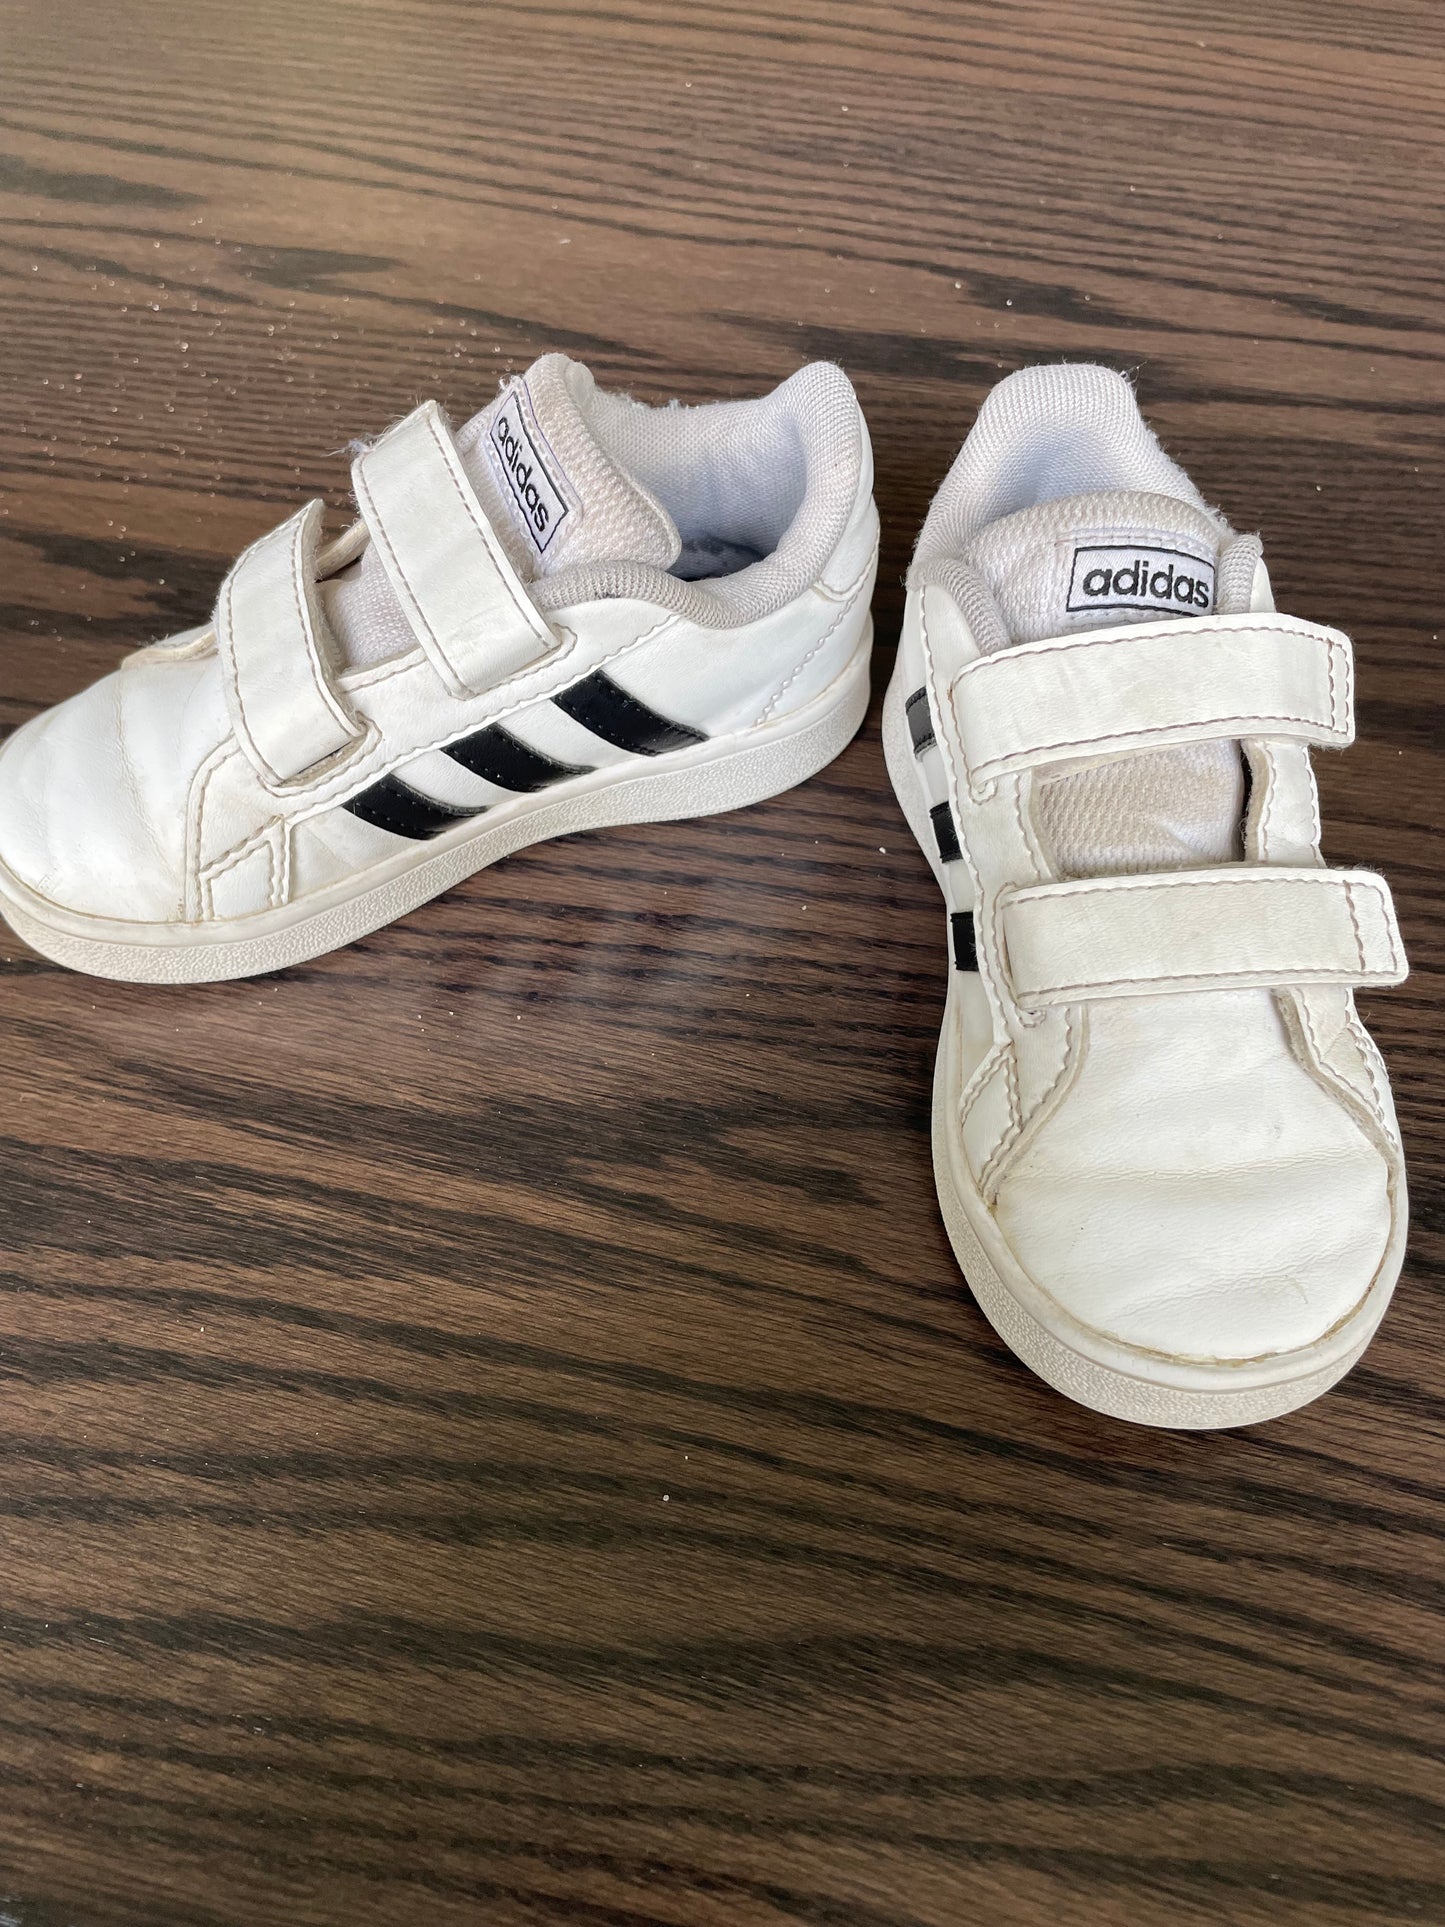 Adidas Grand Court - Toddler Size 8 45242